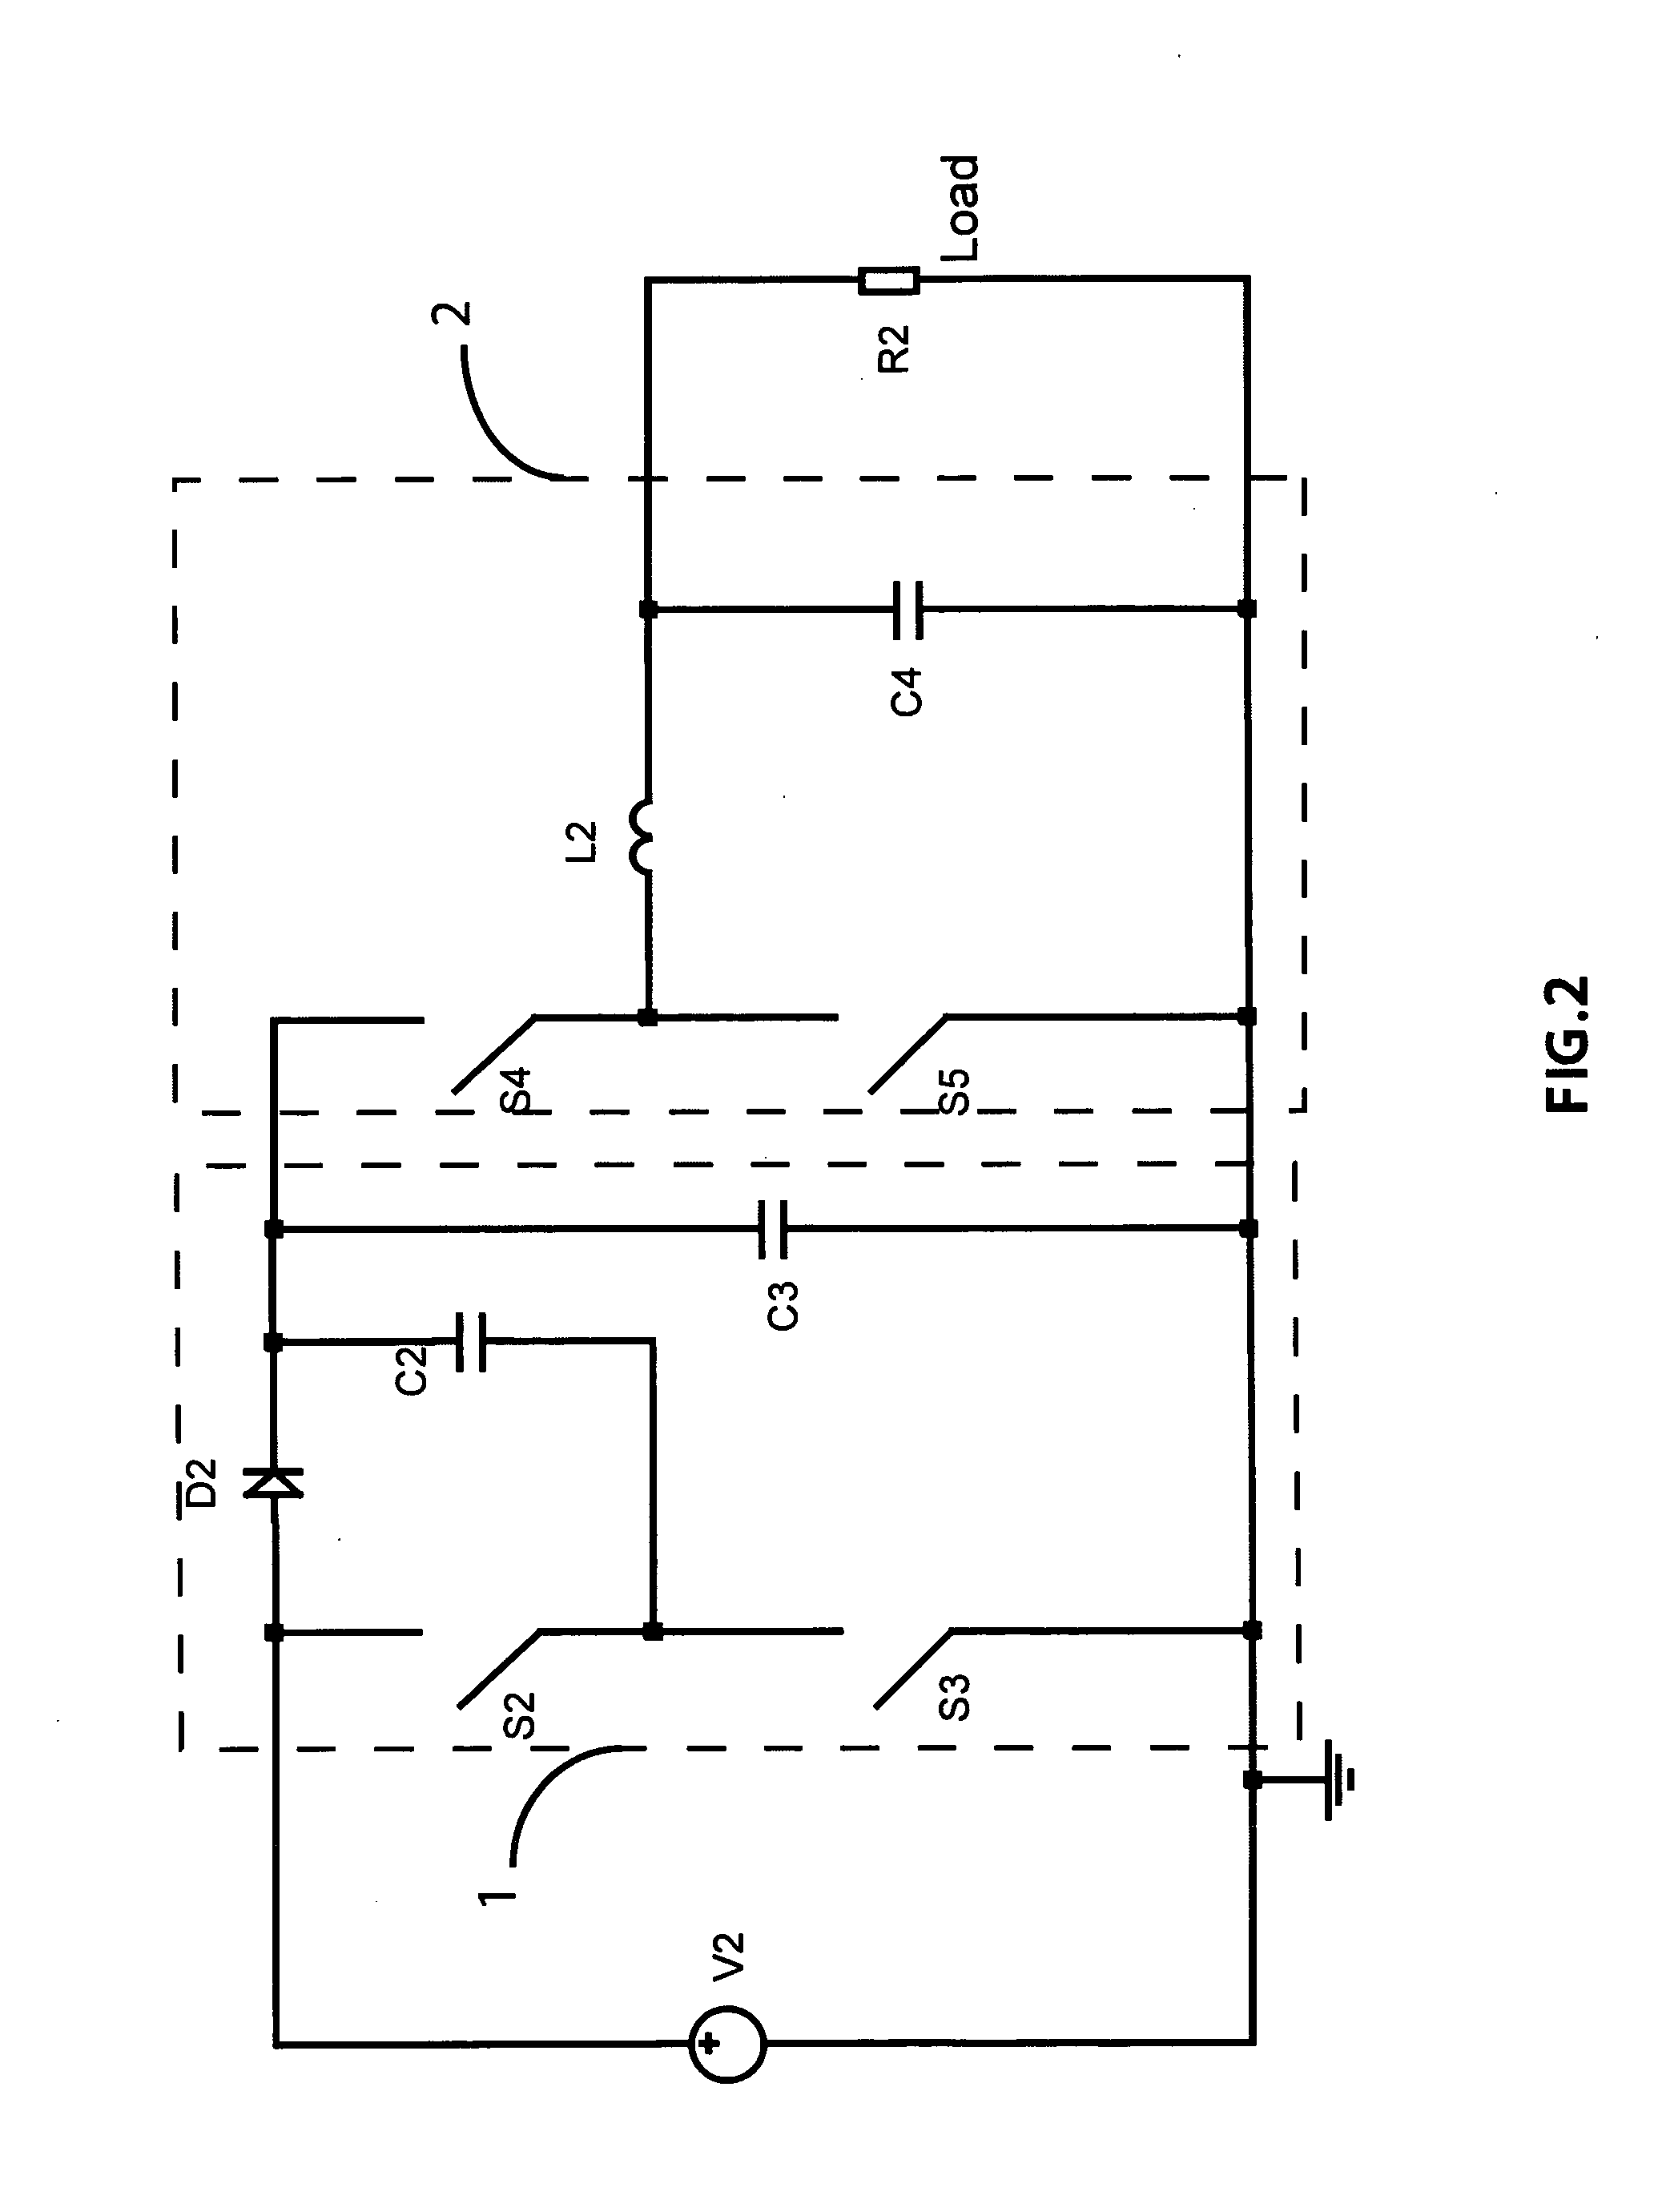 Hysteretic CL power converter